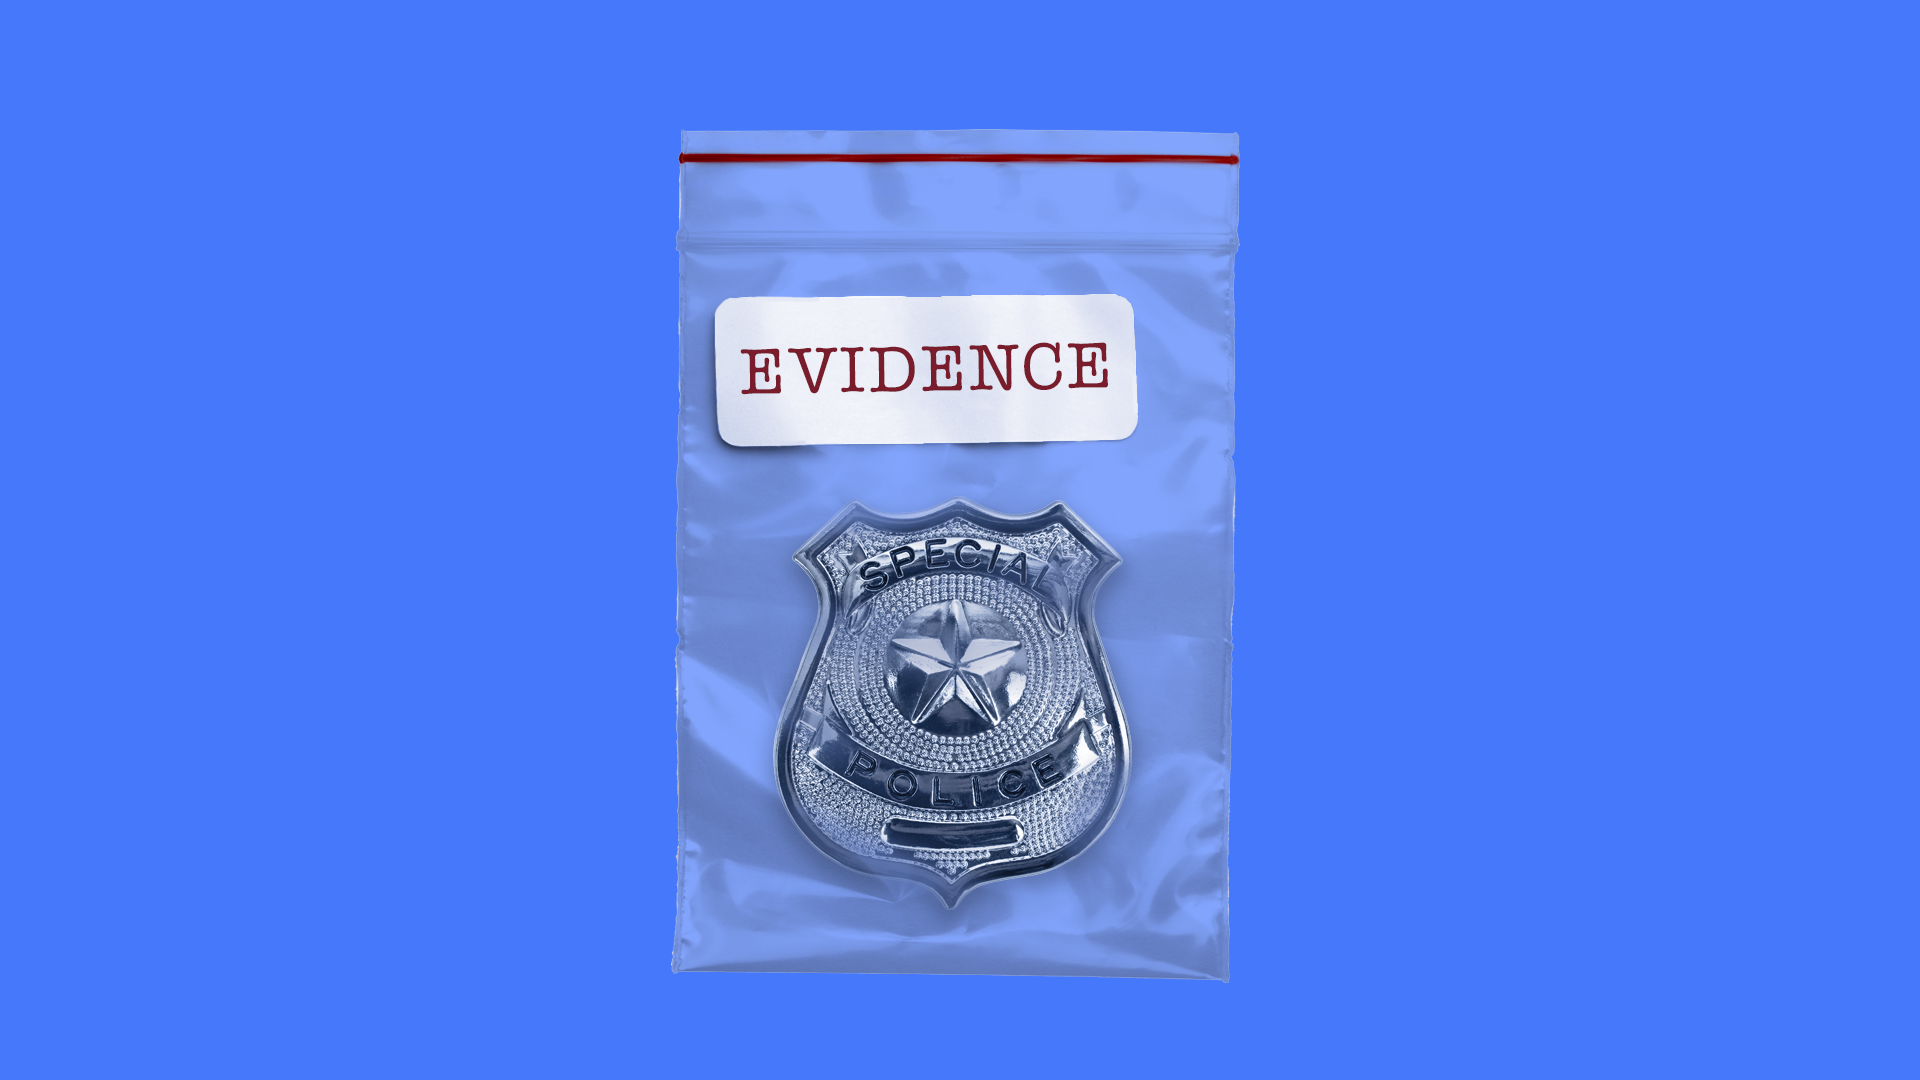 In this illustration, a plastic baggie is labeled with the word "evidence" as a police badge rests inside.